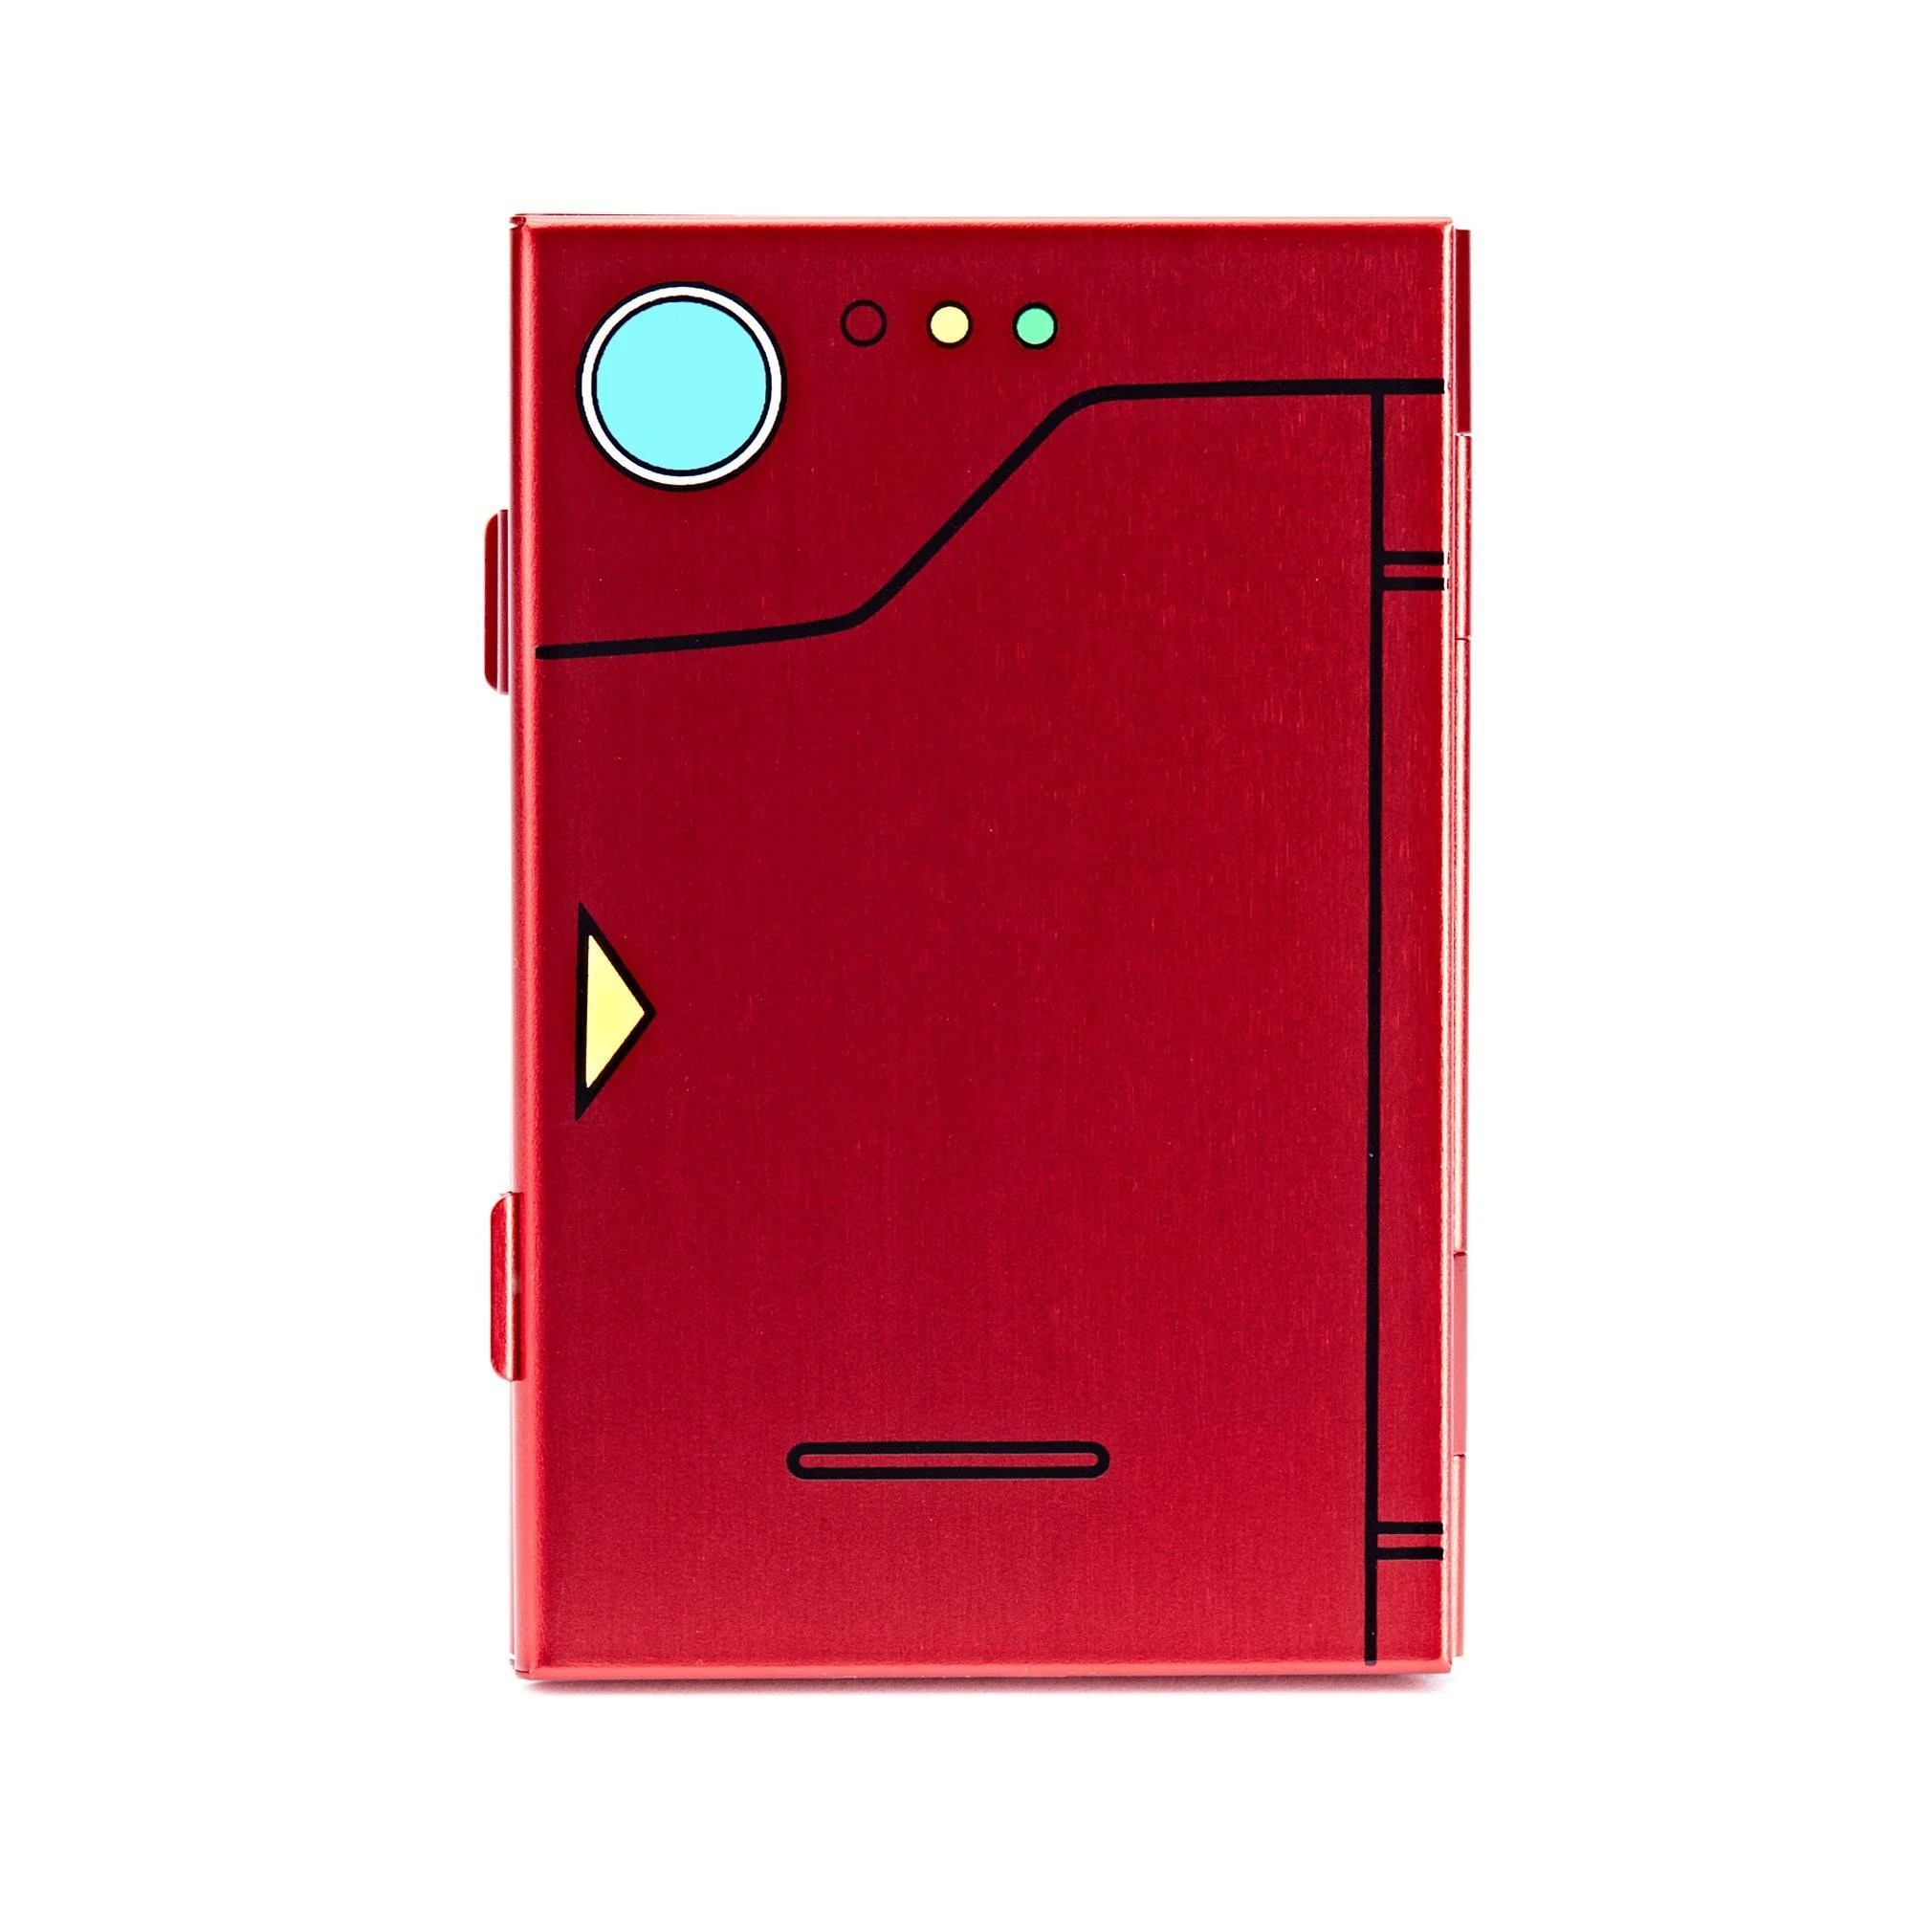 PokeDex Game Card Case For Nintendo Switch (24 Game Card Slots )